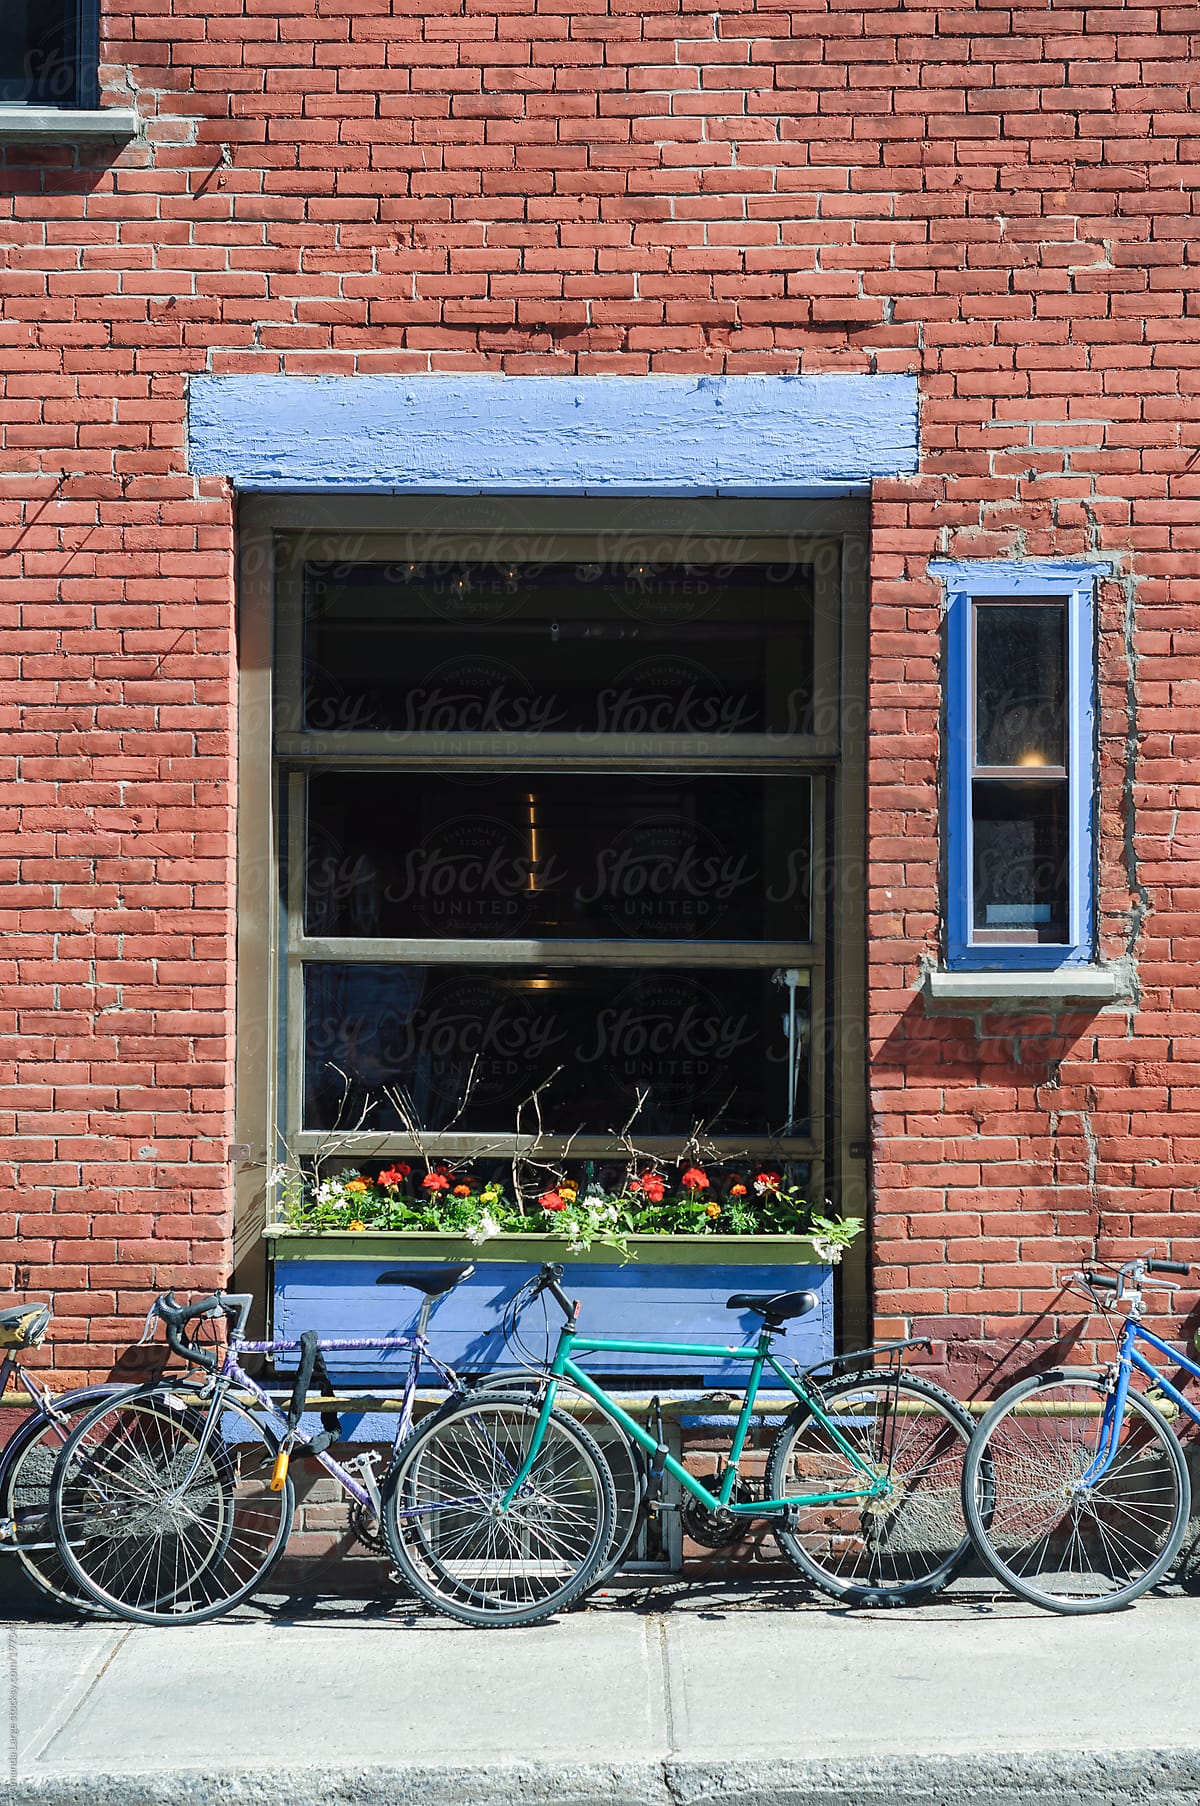 bikes chained up next to a brick wall on a sunny day